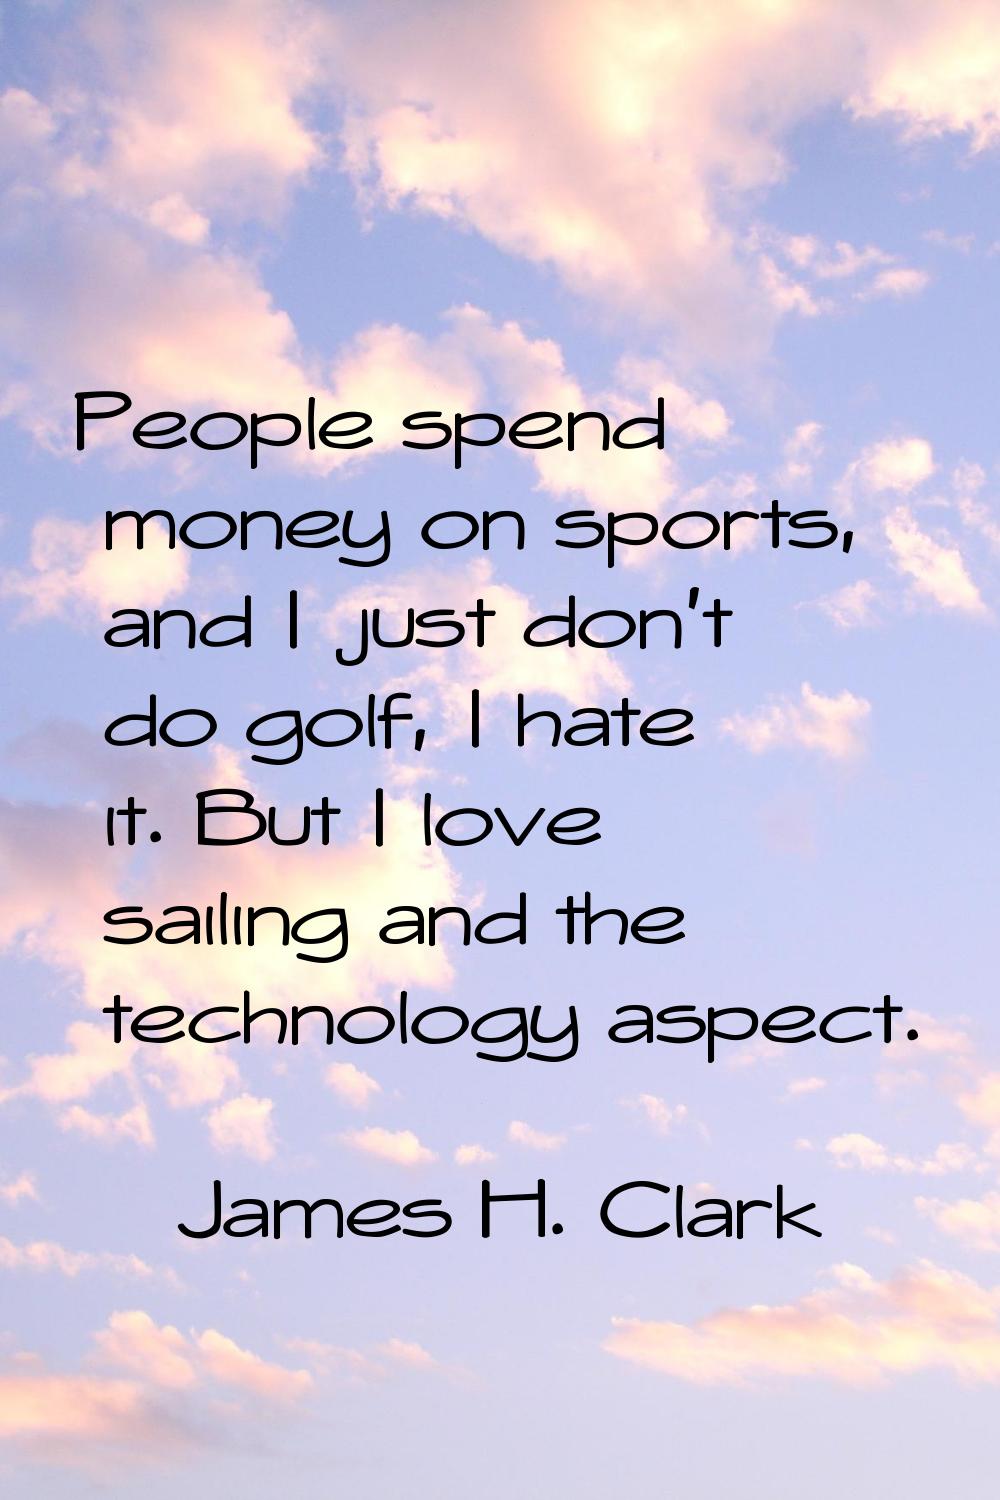 People spend money on sports, and I just don't do golf, I hate it. But I love sailing and the techn